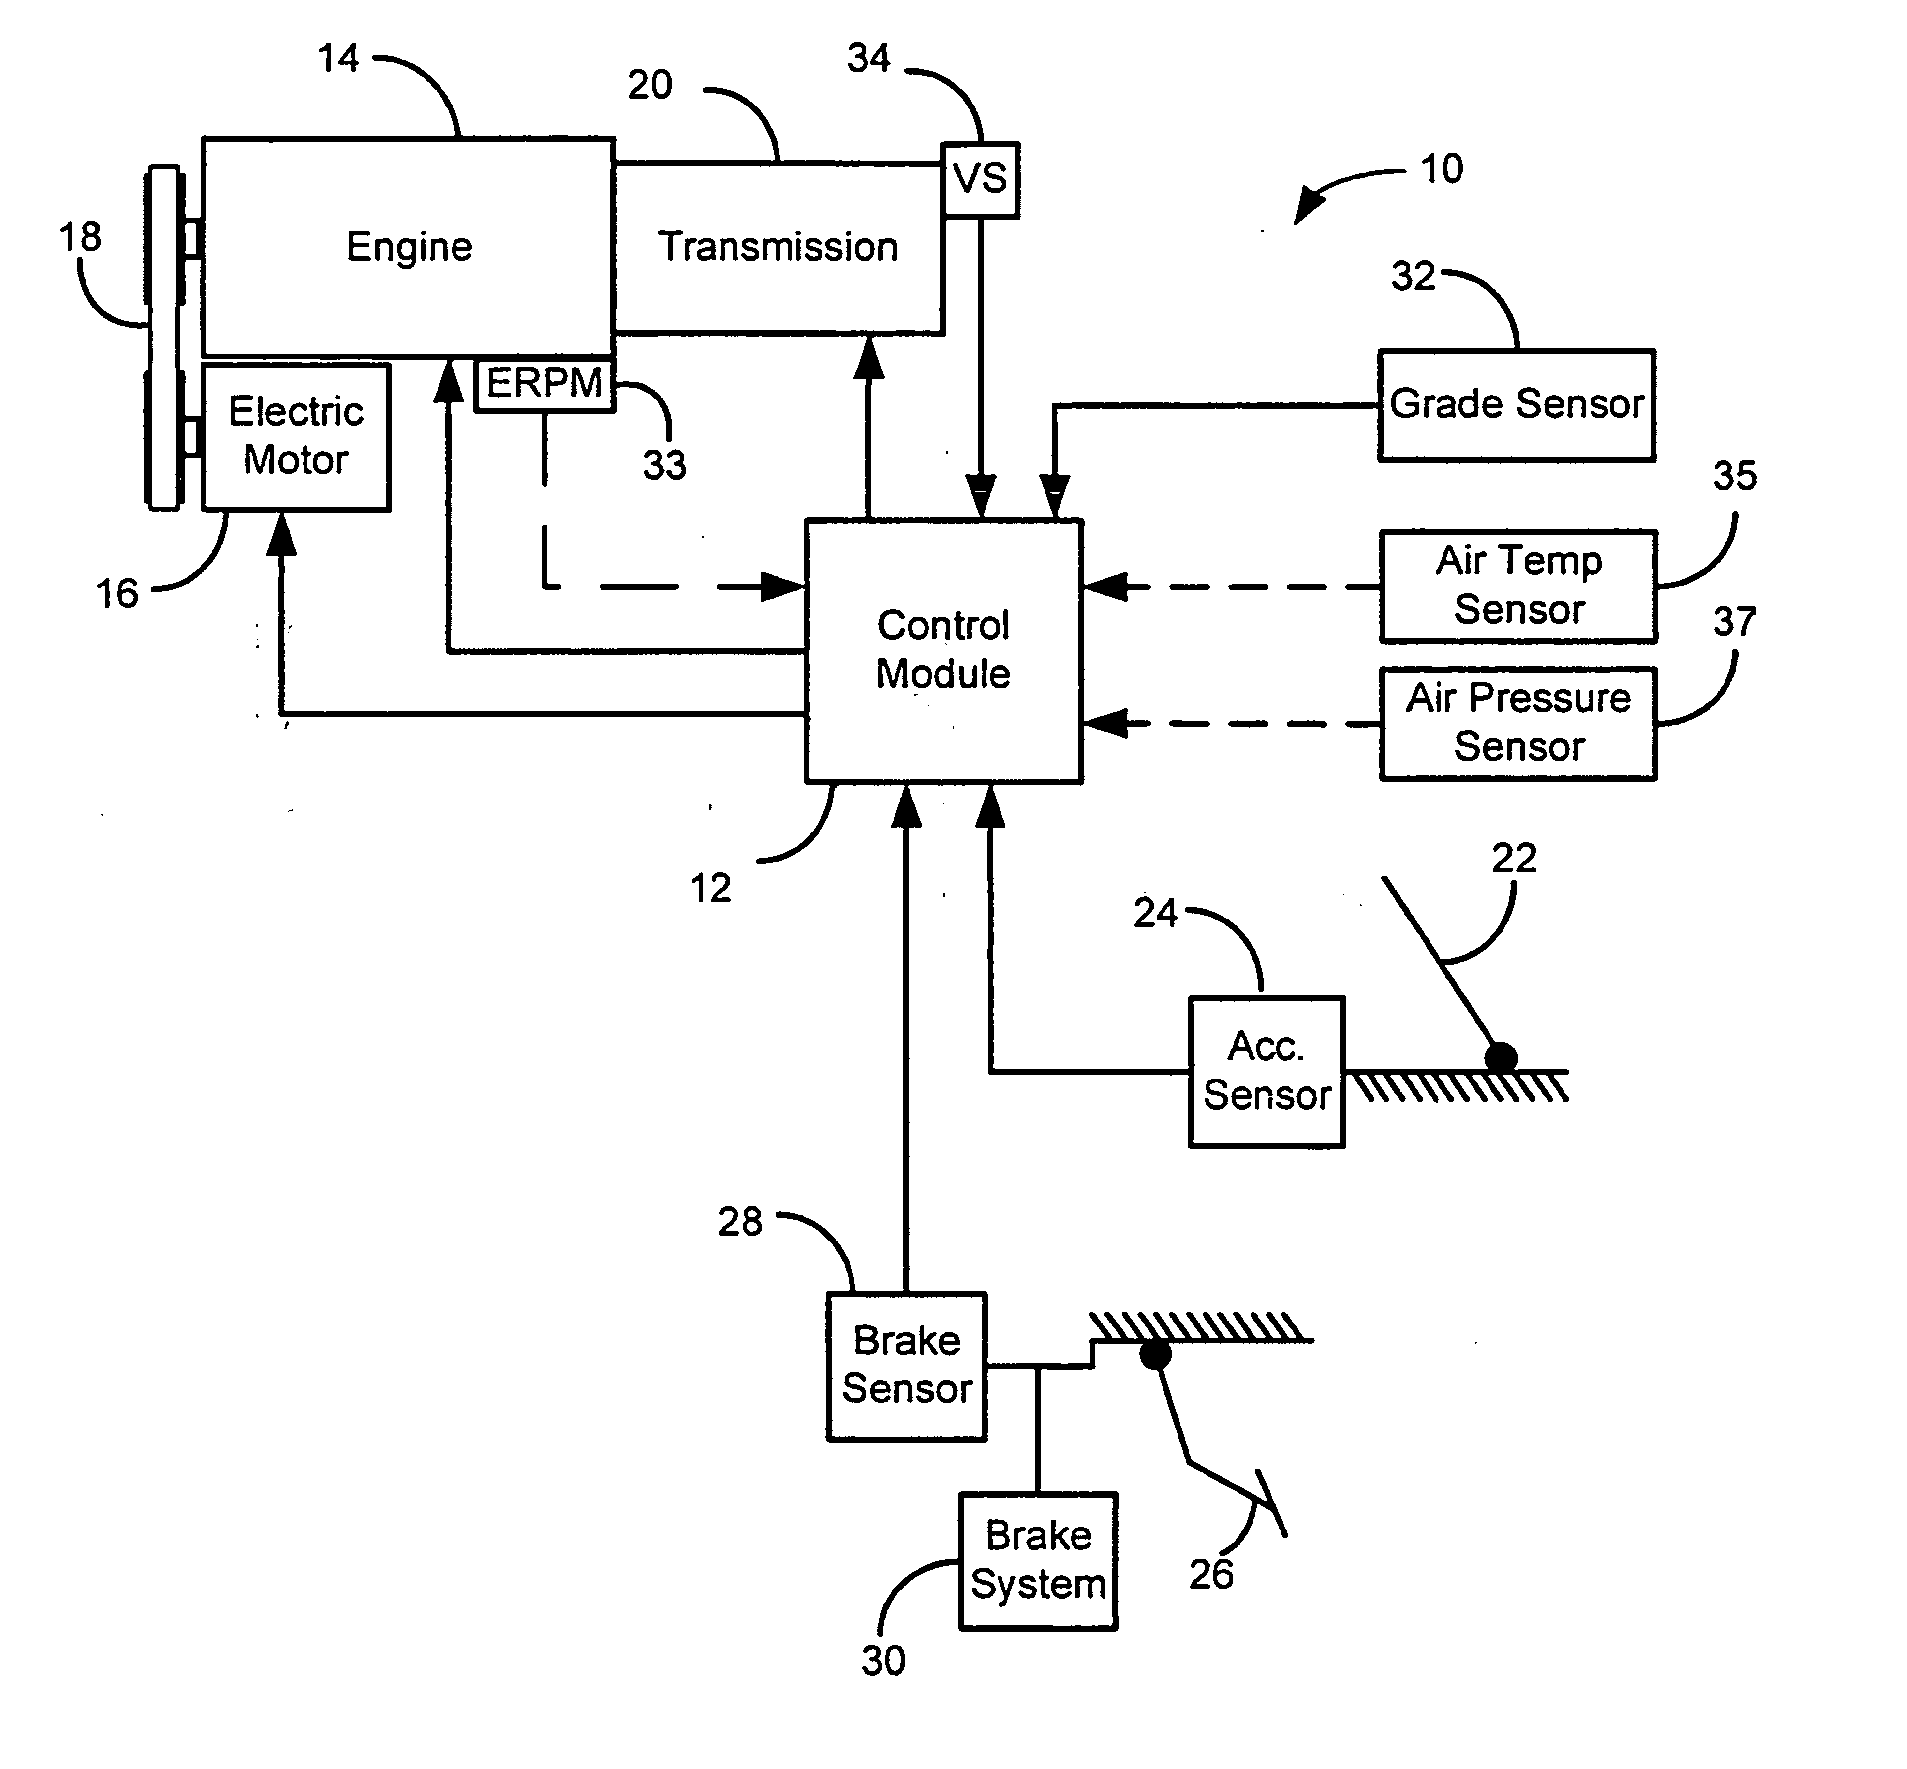 Anti-rollback control for hybrid and conventional powertrain vehicles